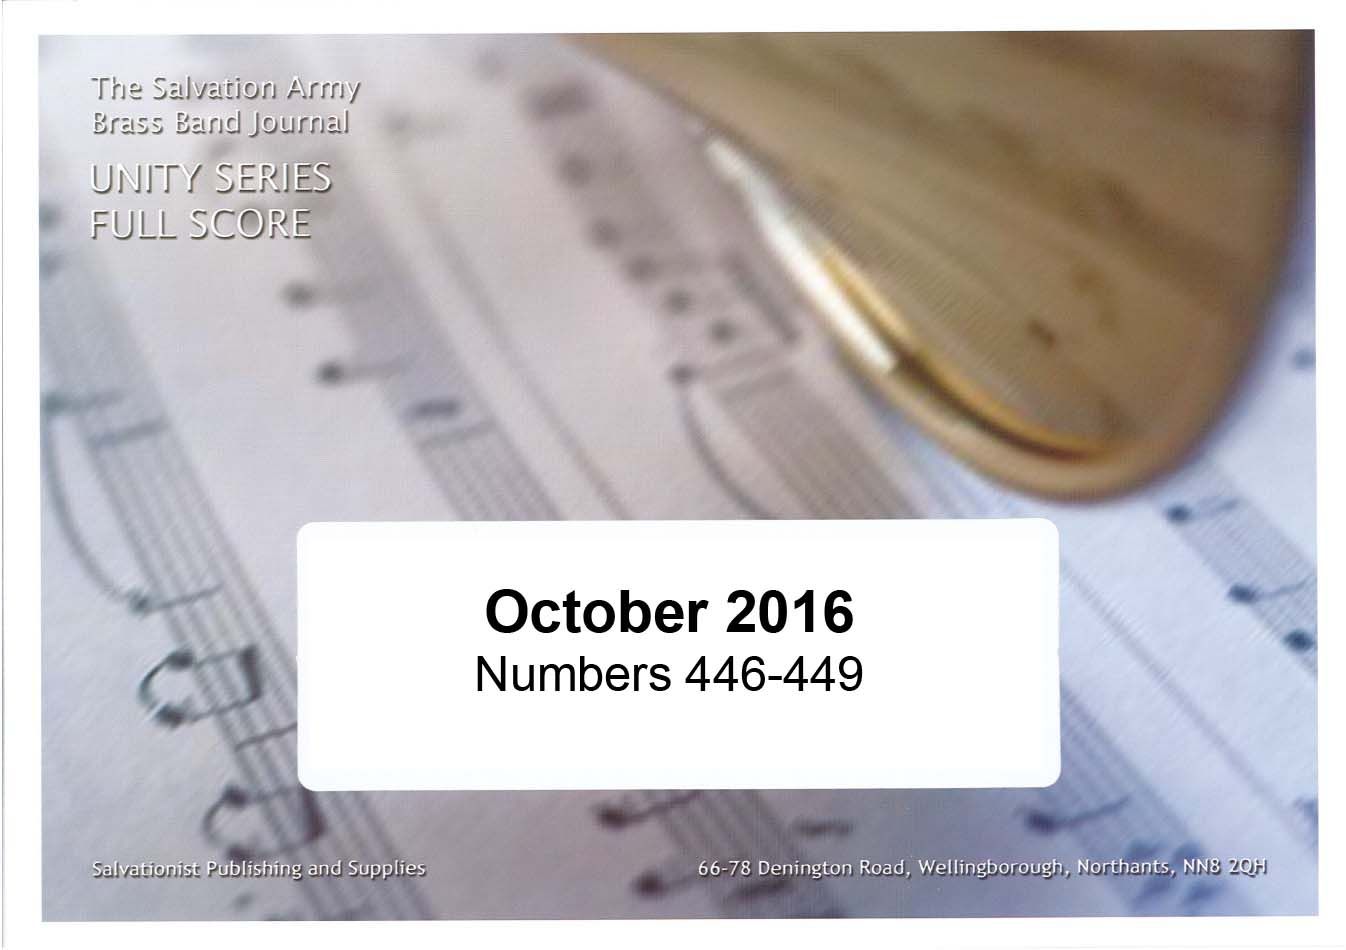 Unity Series Band Journal October 2016 Number 446 - 449